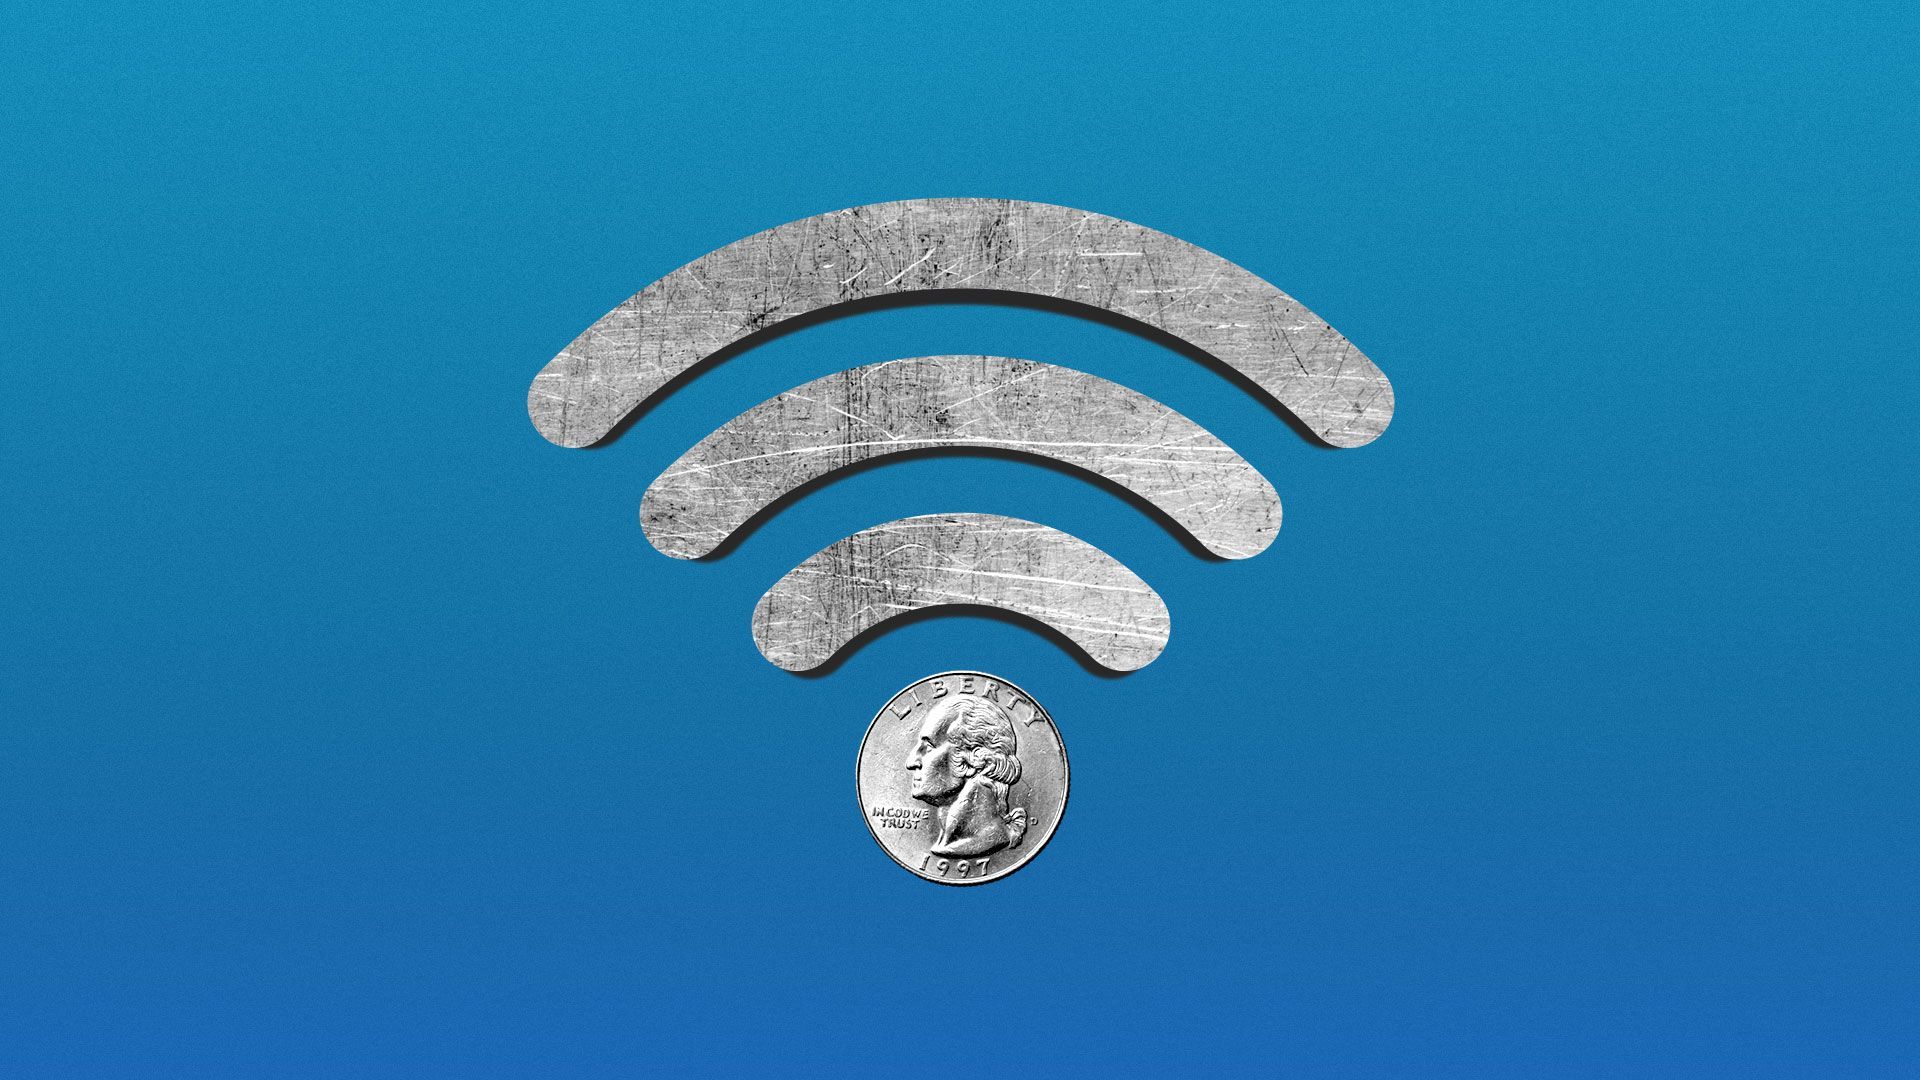 Illustration of quarter as the base of the wi-fi symbol